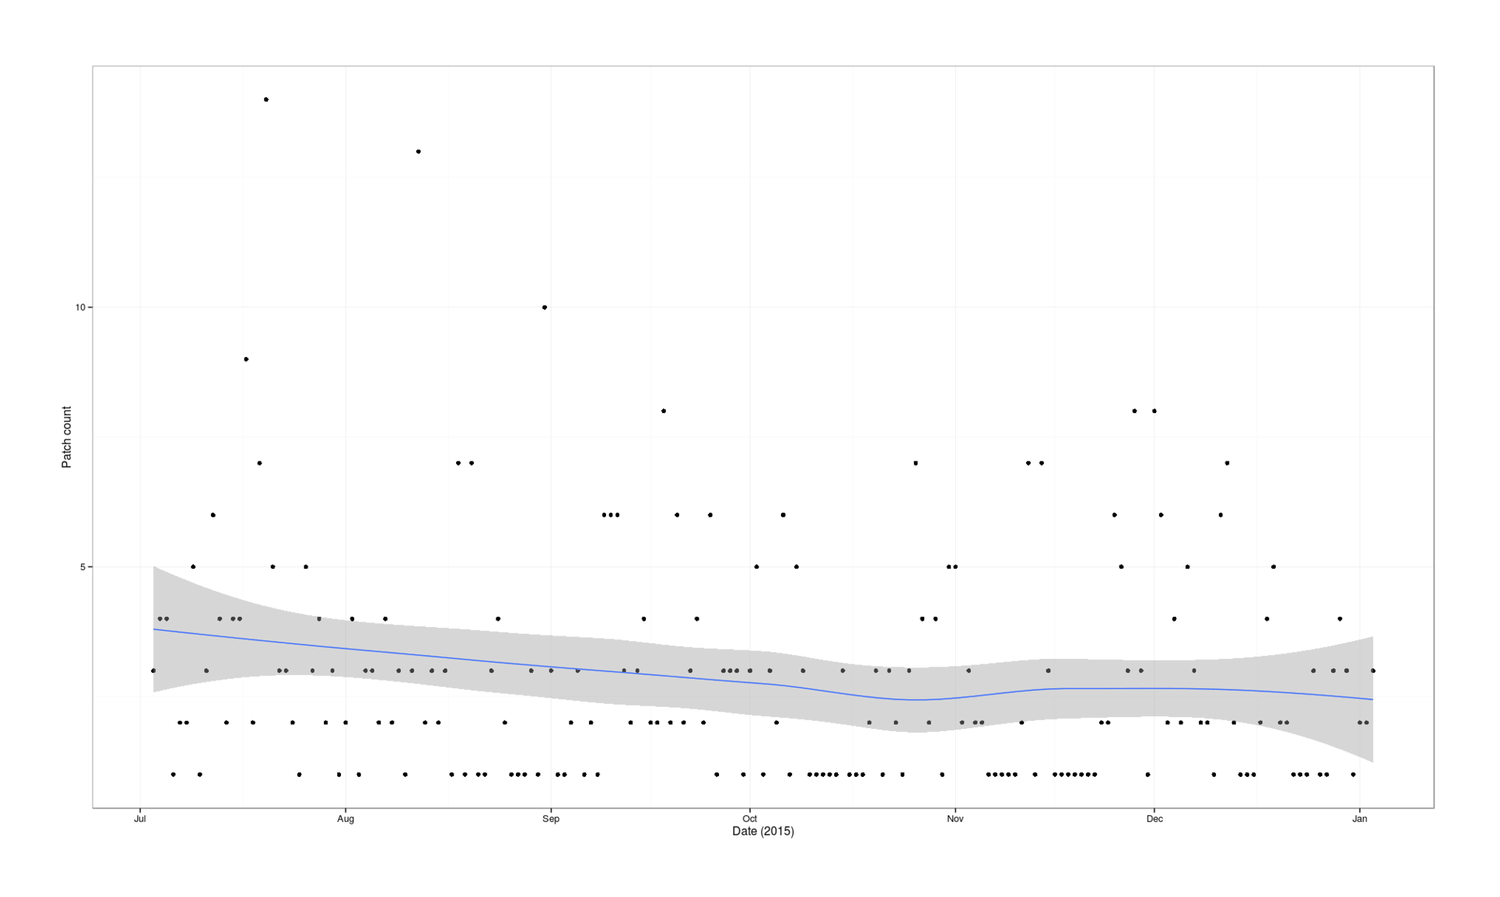 Plot of patch creations (y-axis) versus date (x-axis): July 2015 to January 2016